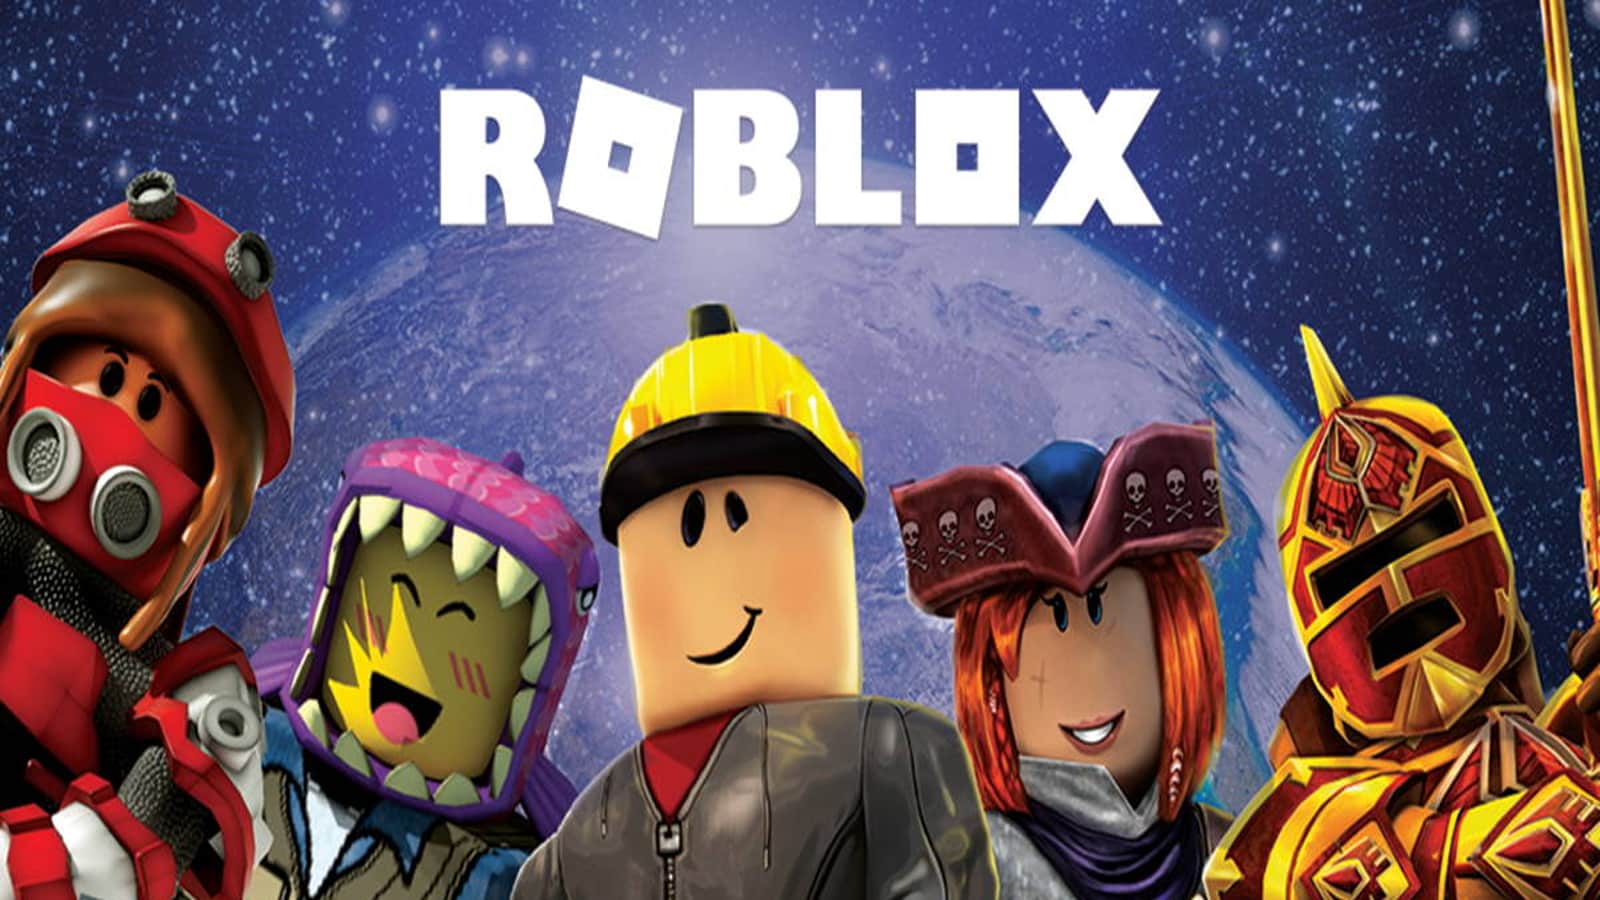 Roblox 2022 Wallpapers - Top Free Roblox 2022 Backgrounds - Wallpaperaccess